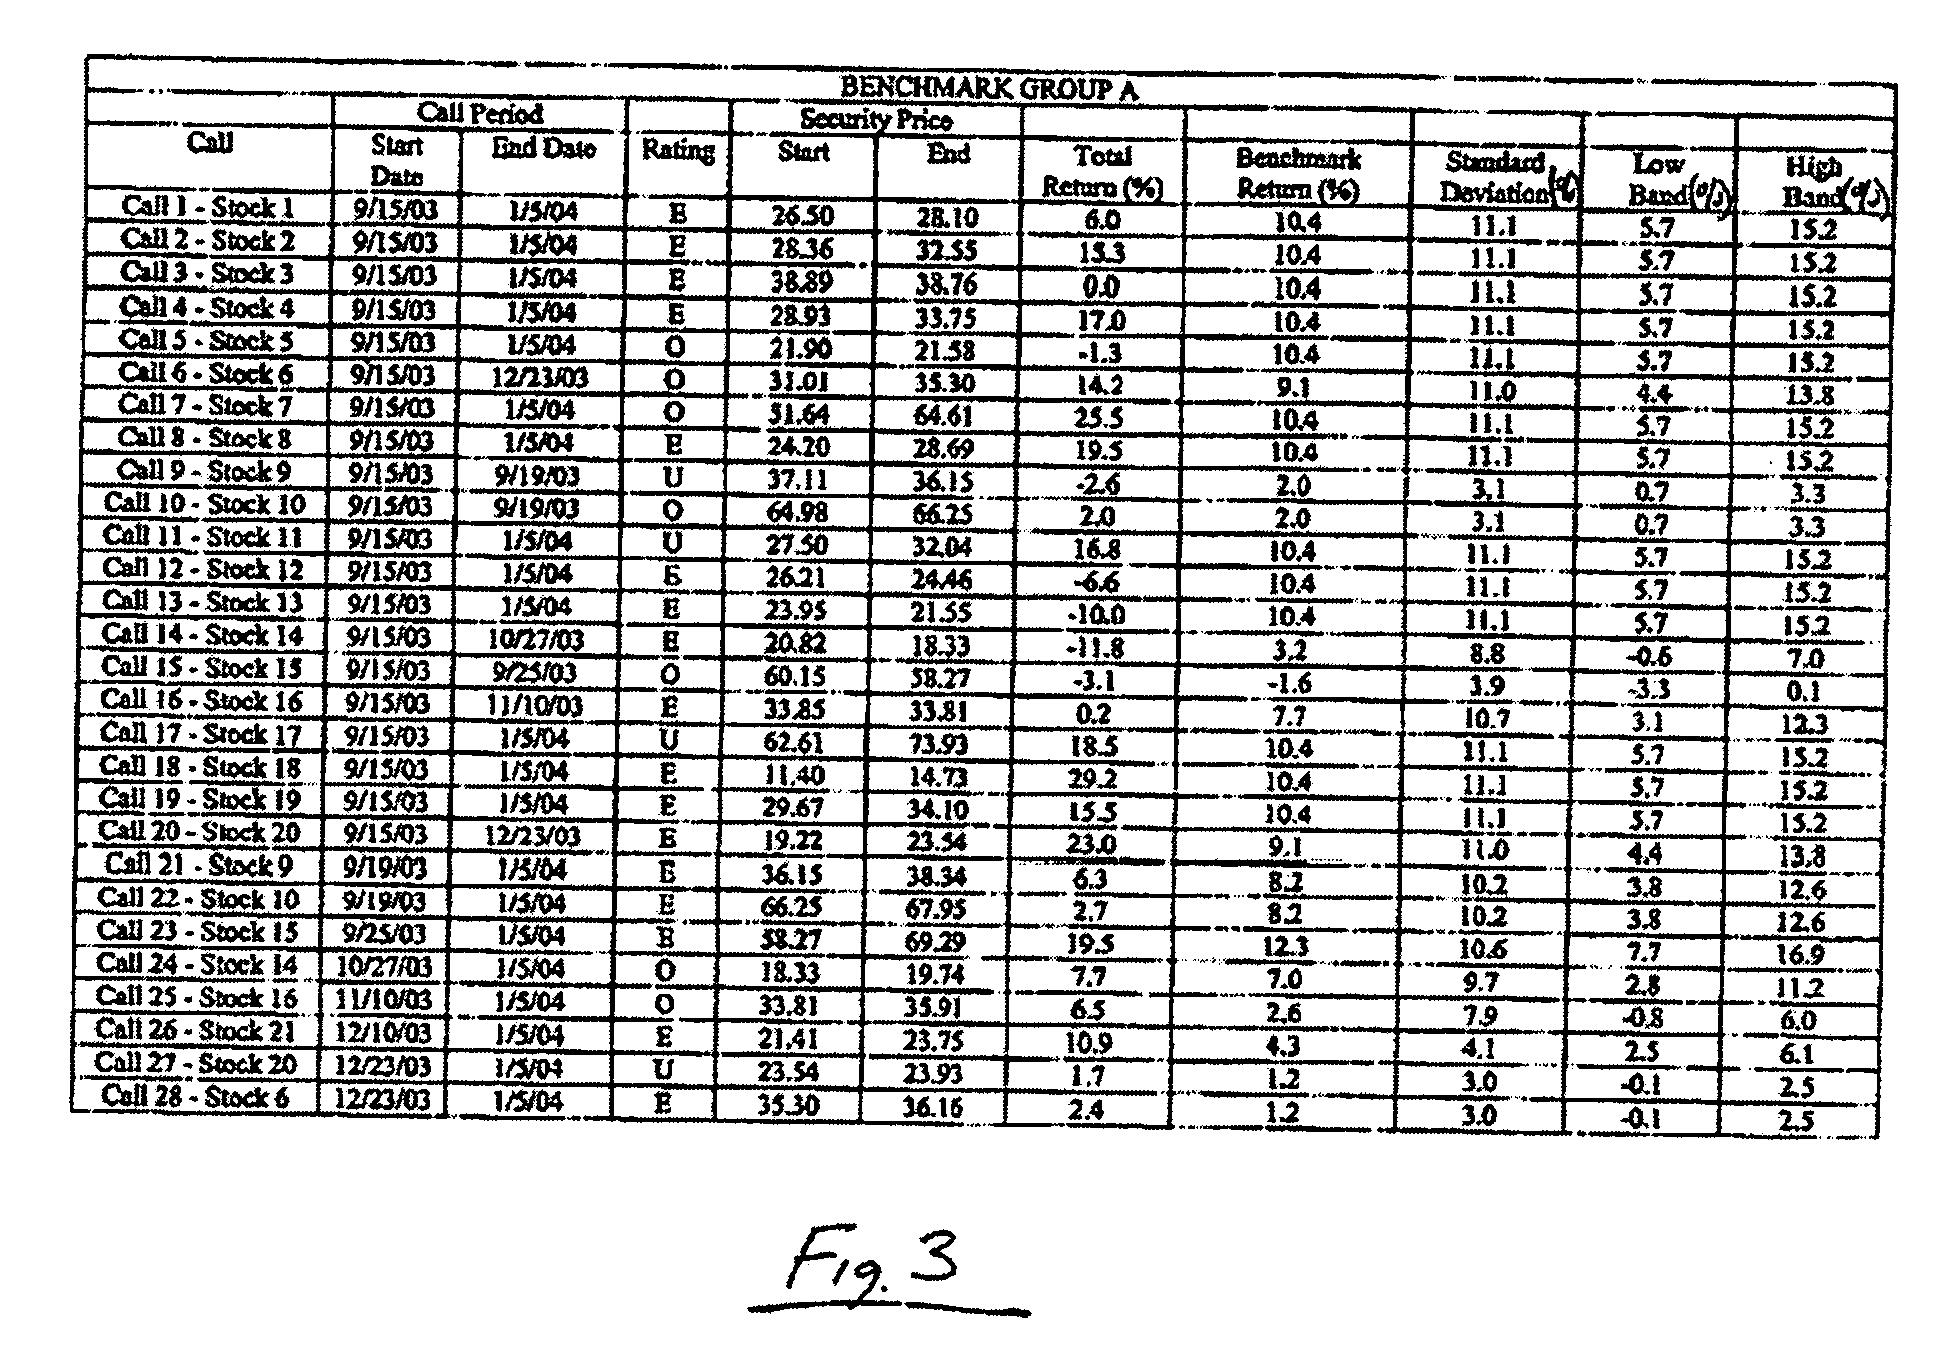 Method and system for evaluating the investment ratings of a securities analyst